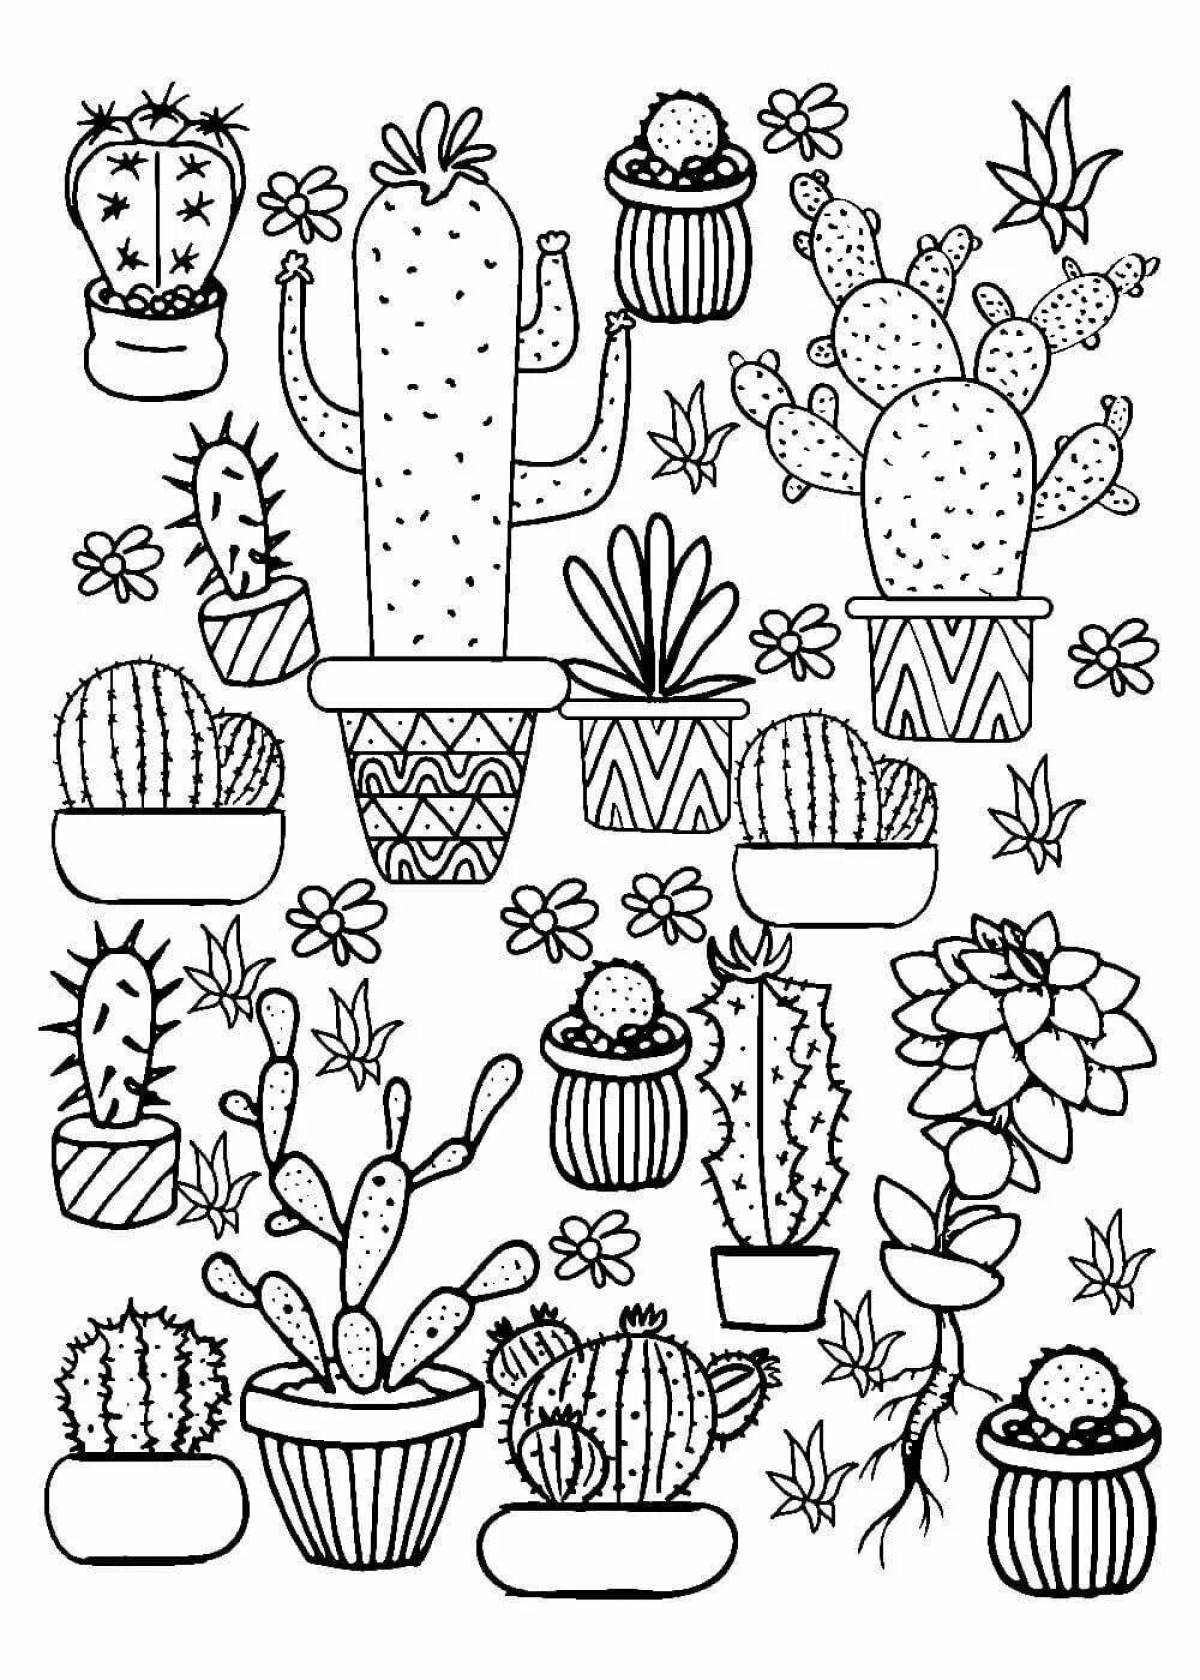 Playful indie coloring book for kids